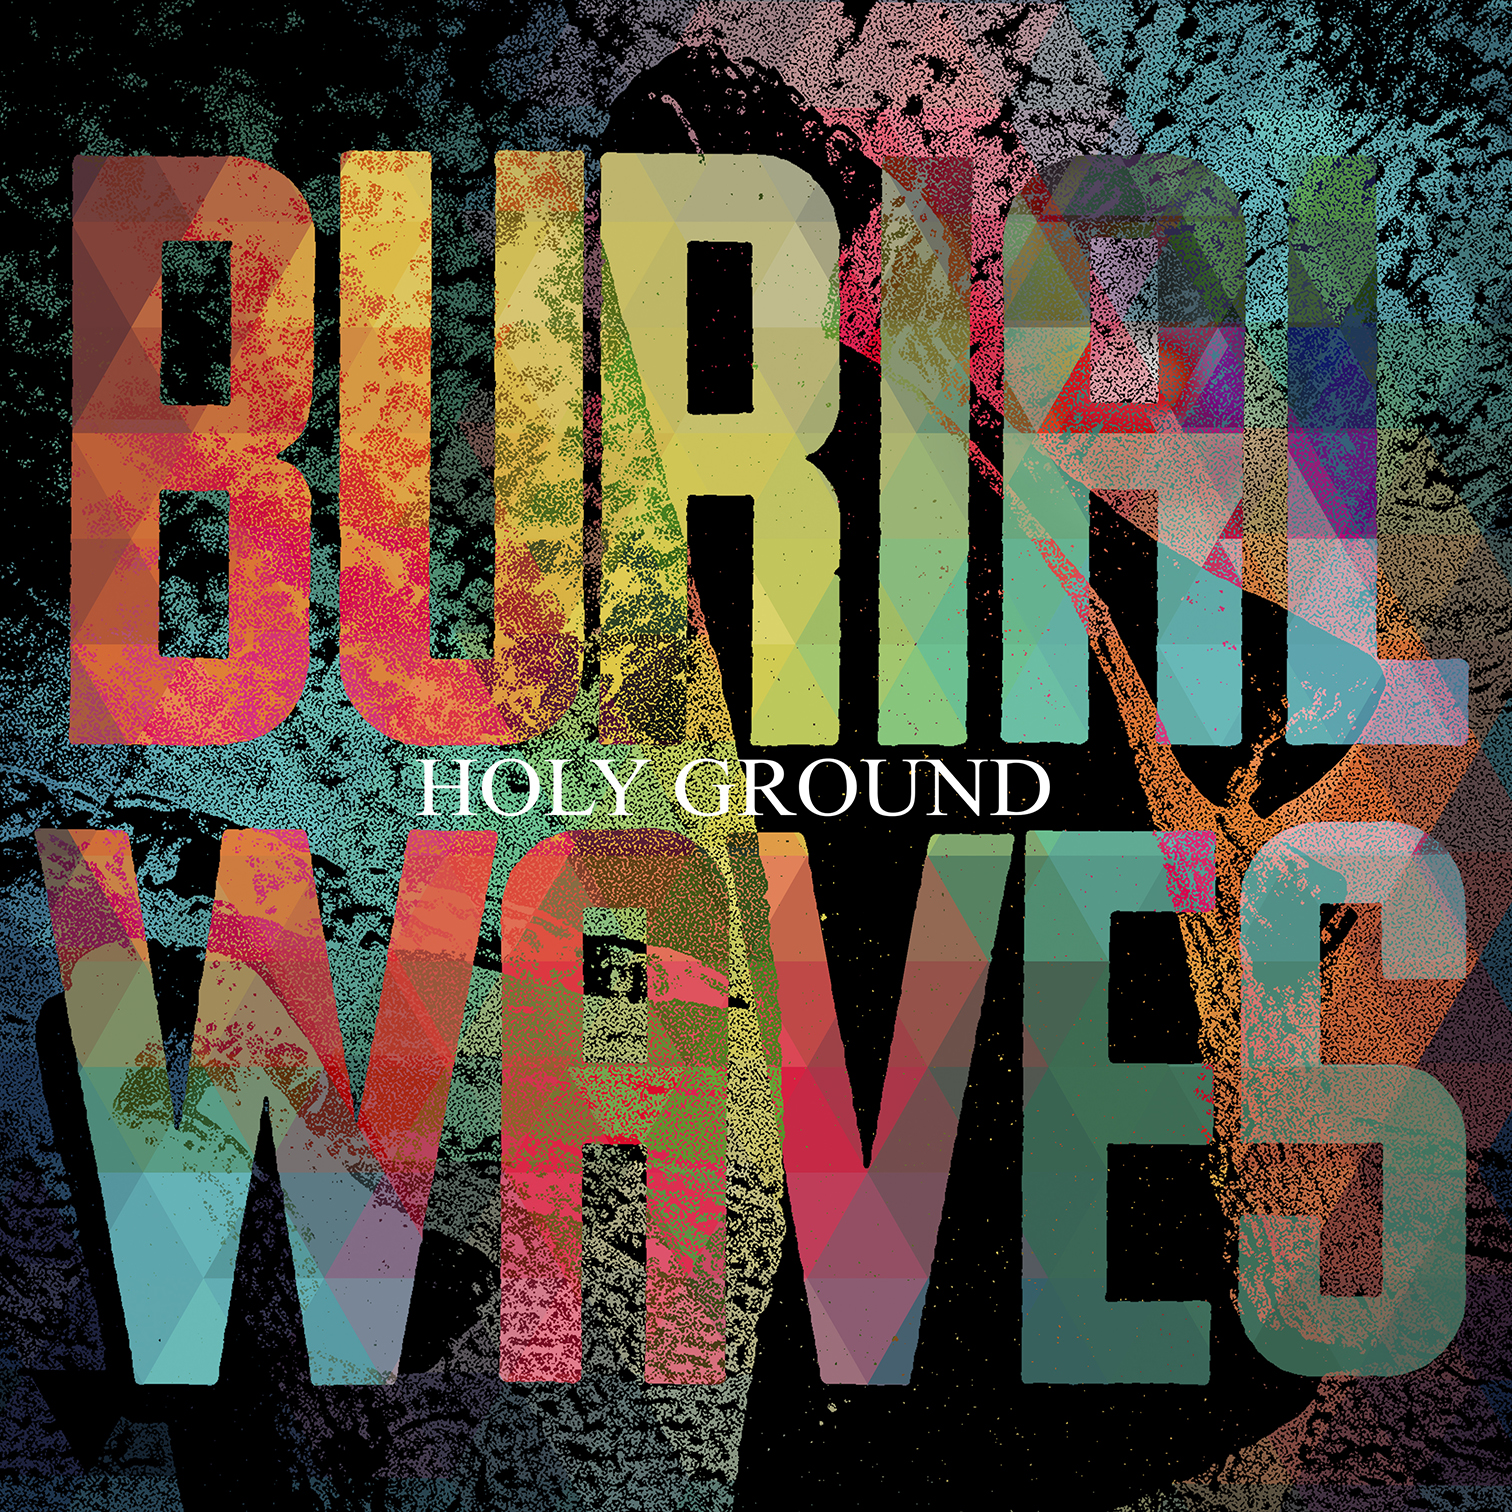 BURIAL WAVES: Baltimore/DC Post-Rock Quintet Releases Debut EP, Holy Ground; Record Is Out Now Through All Digital Providers Via Dark Operative